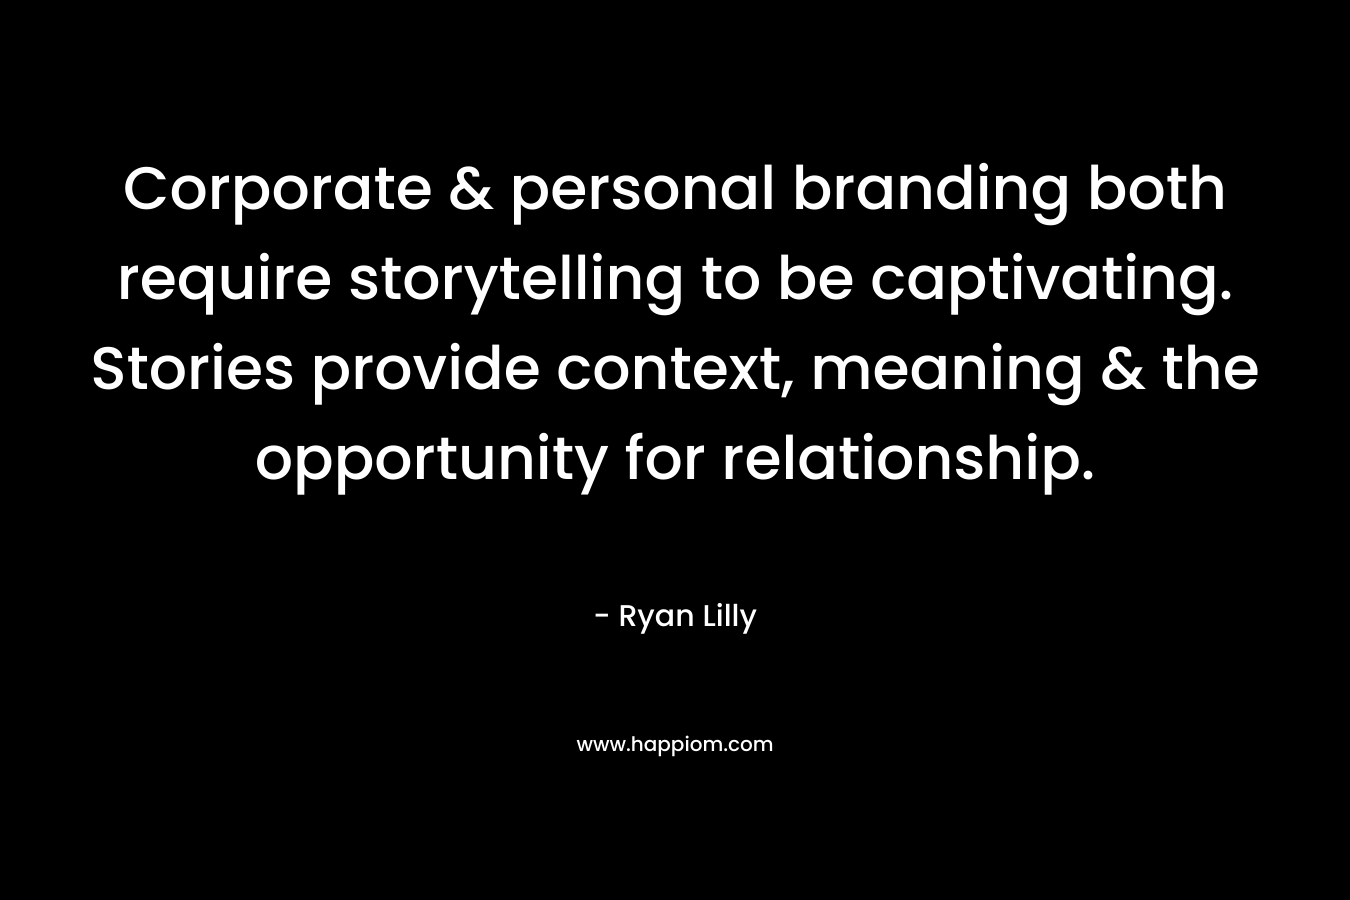 Corporate & personal branding both require storytelling to be captivating. Stories provide context, meaning & the opportunity for relationship. – Ryan Lilly